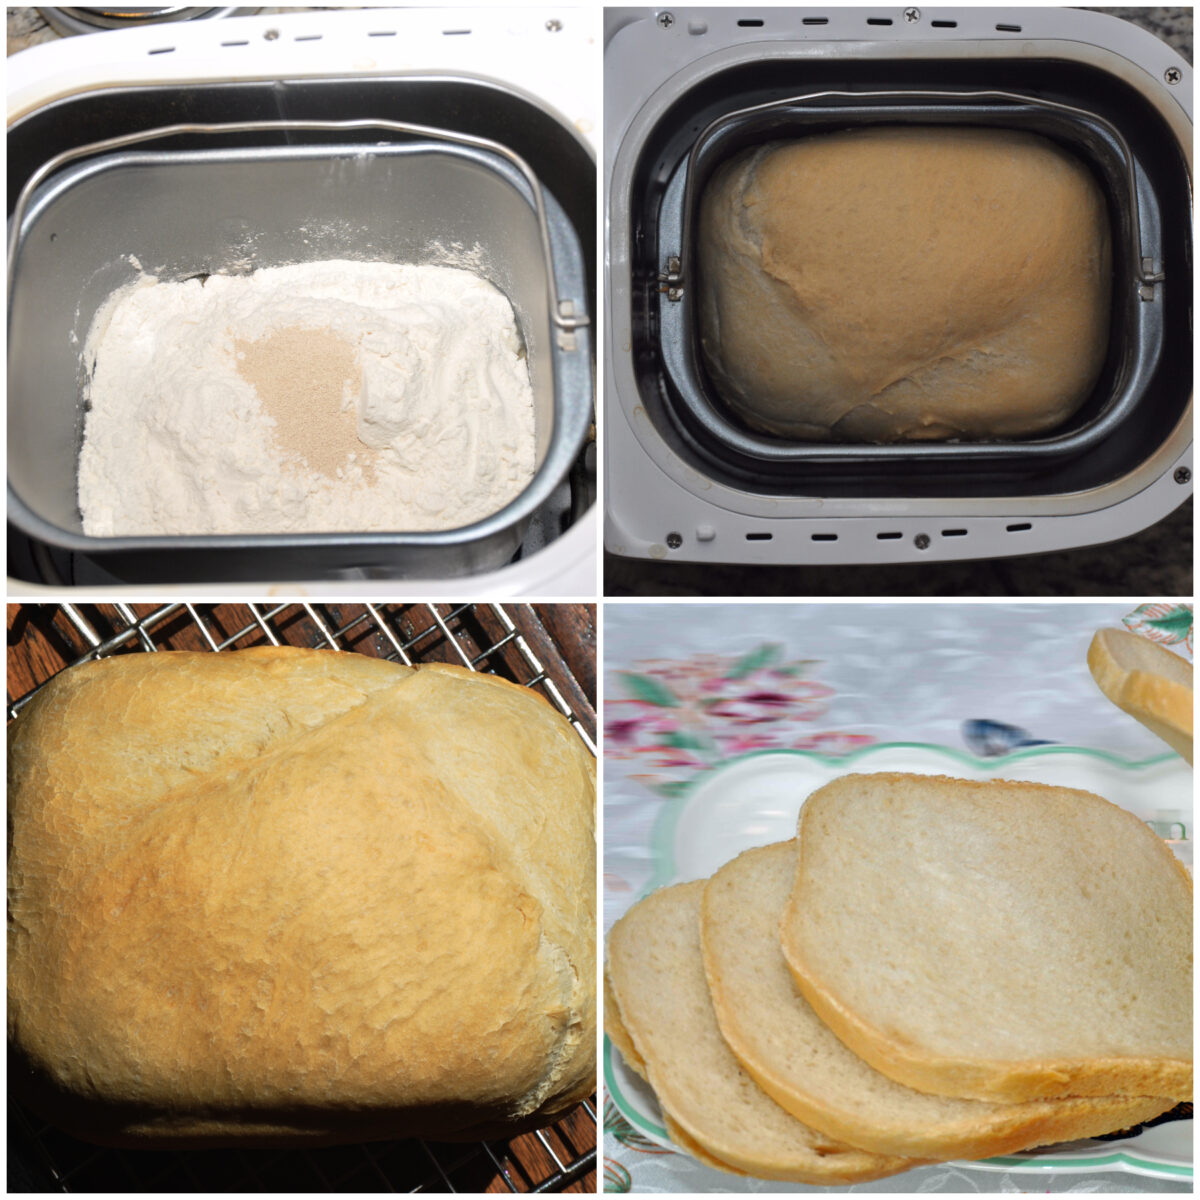 French bread being baked from start to finish in bread maker.